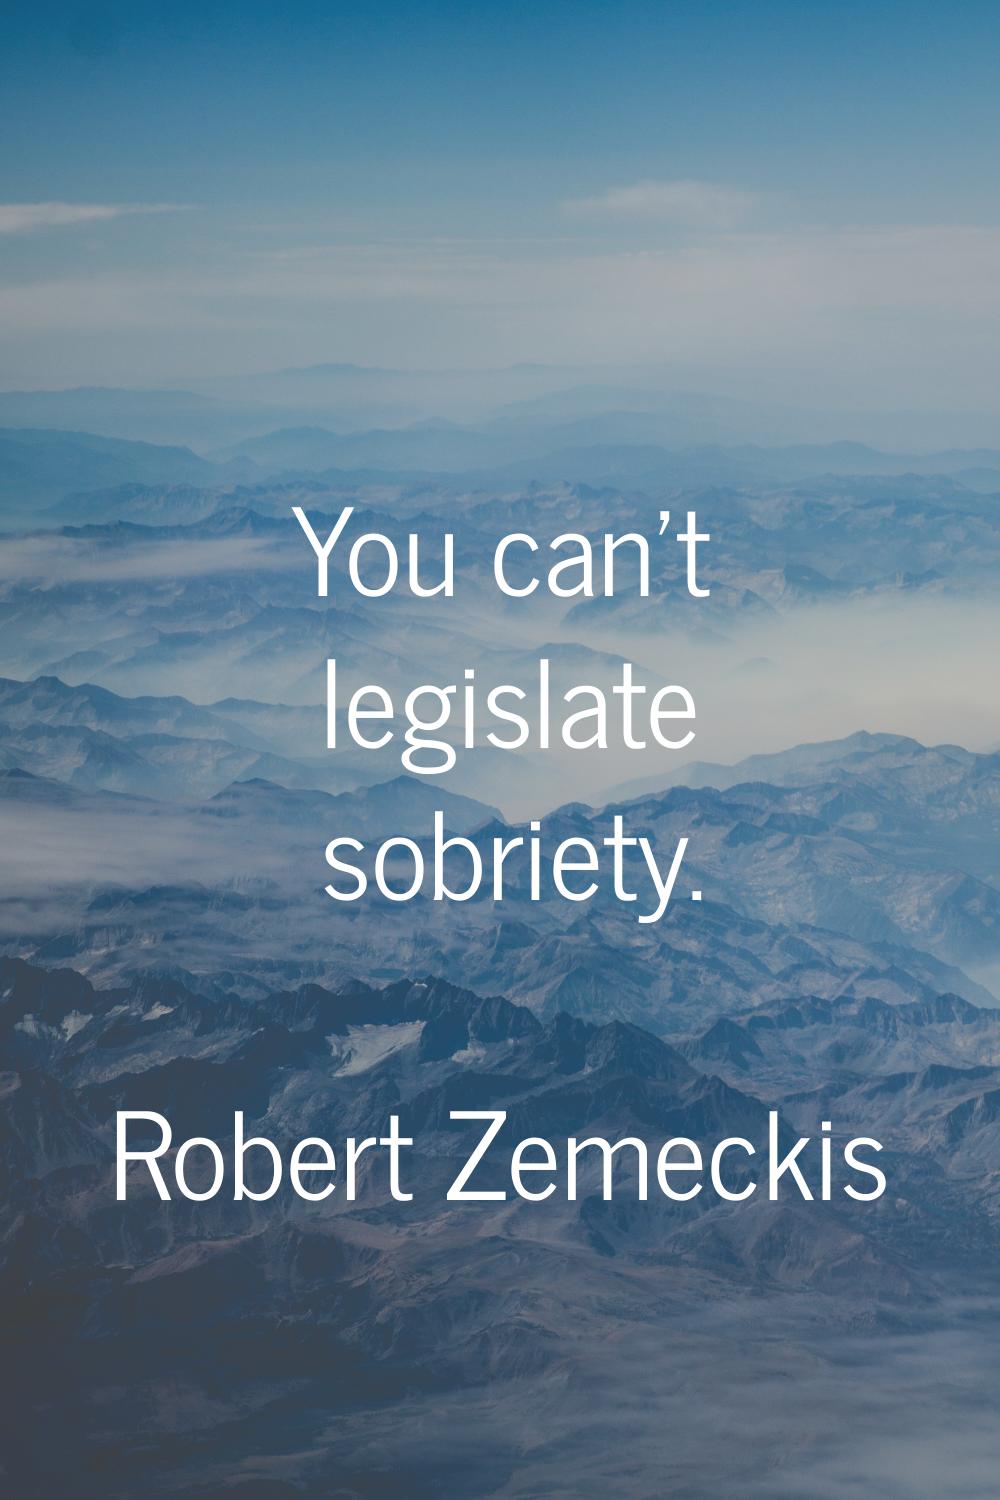 You can't legislate sobriety.